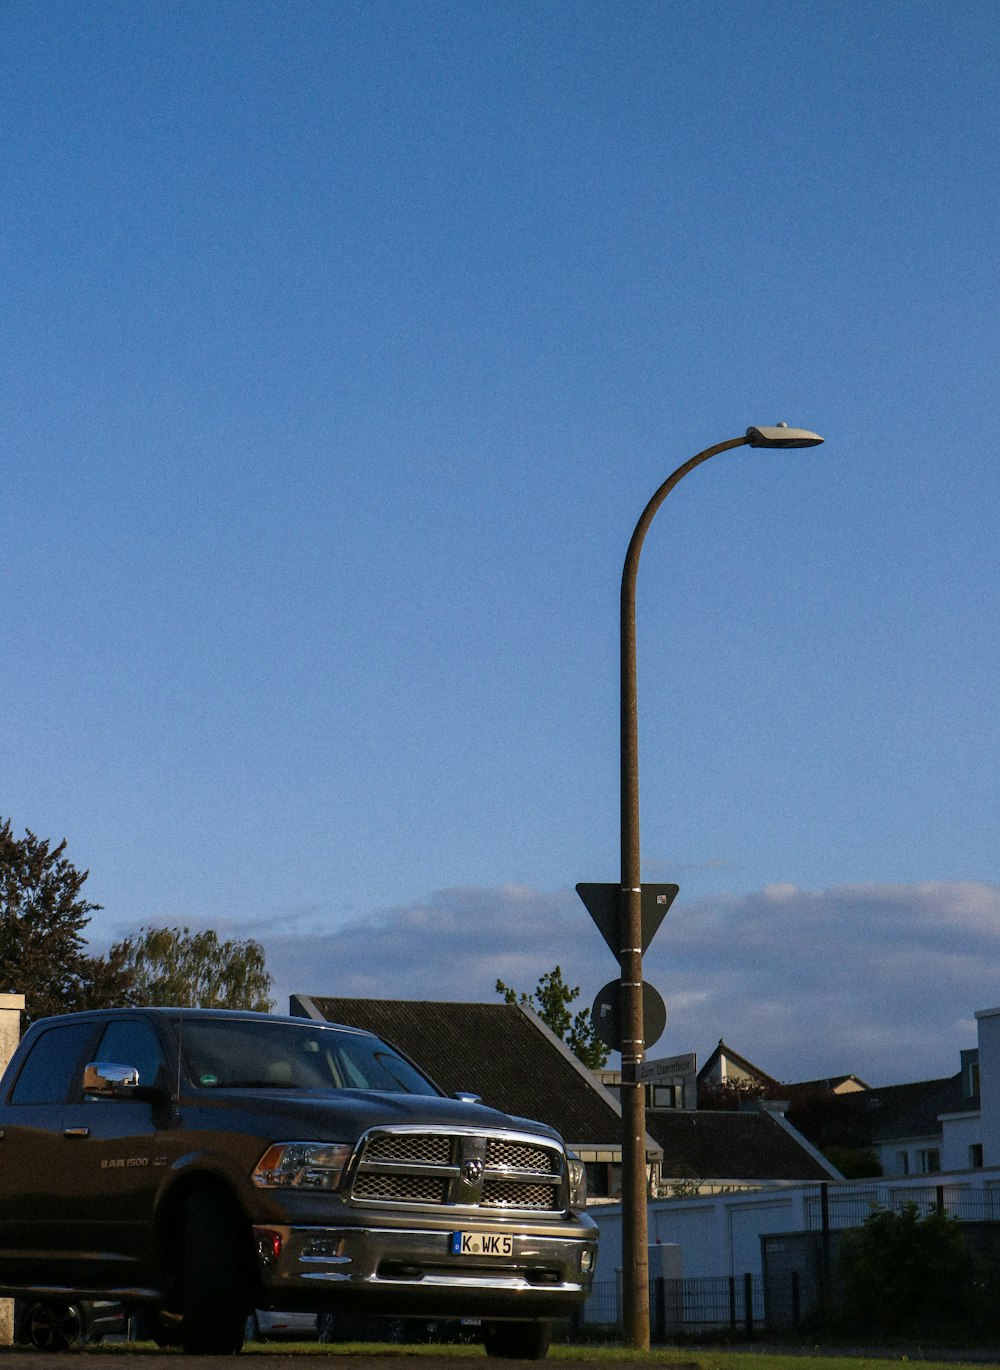 a truck is parked next to a street light